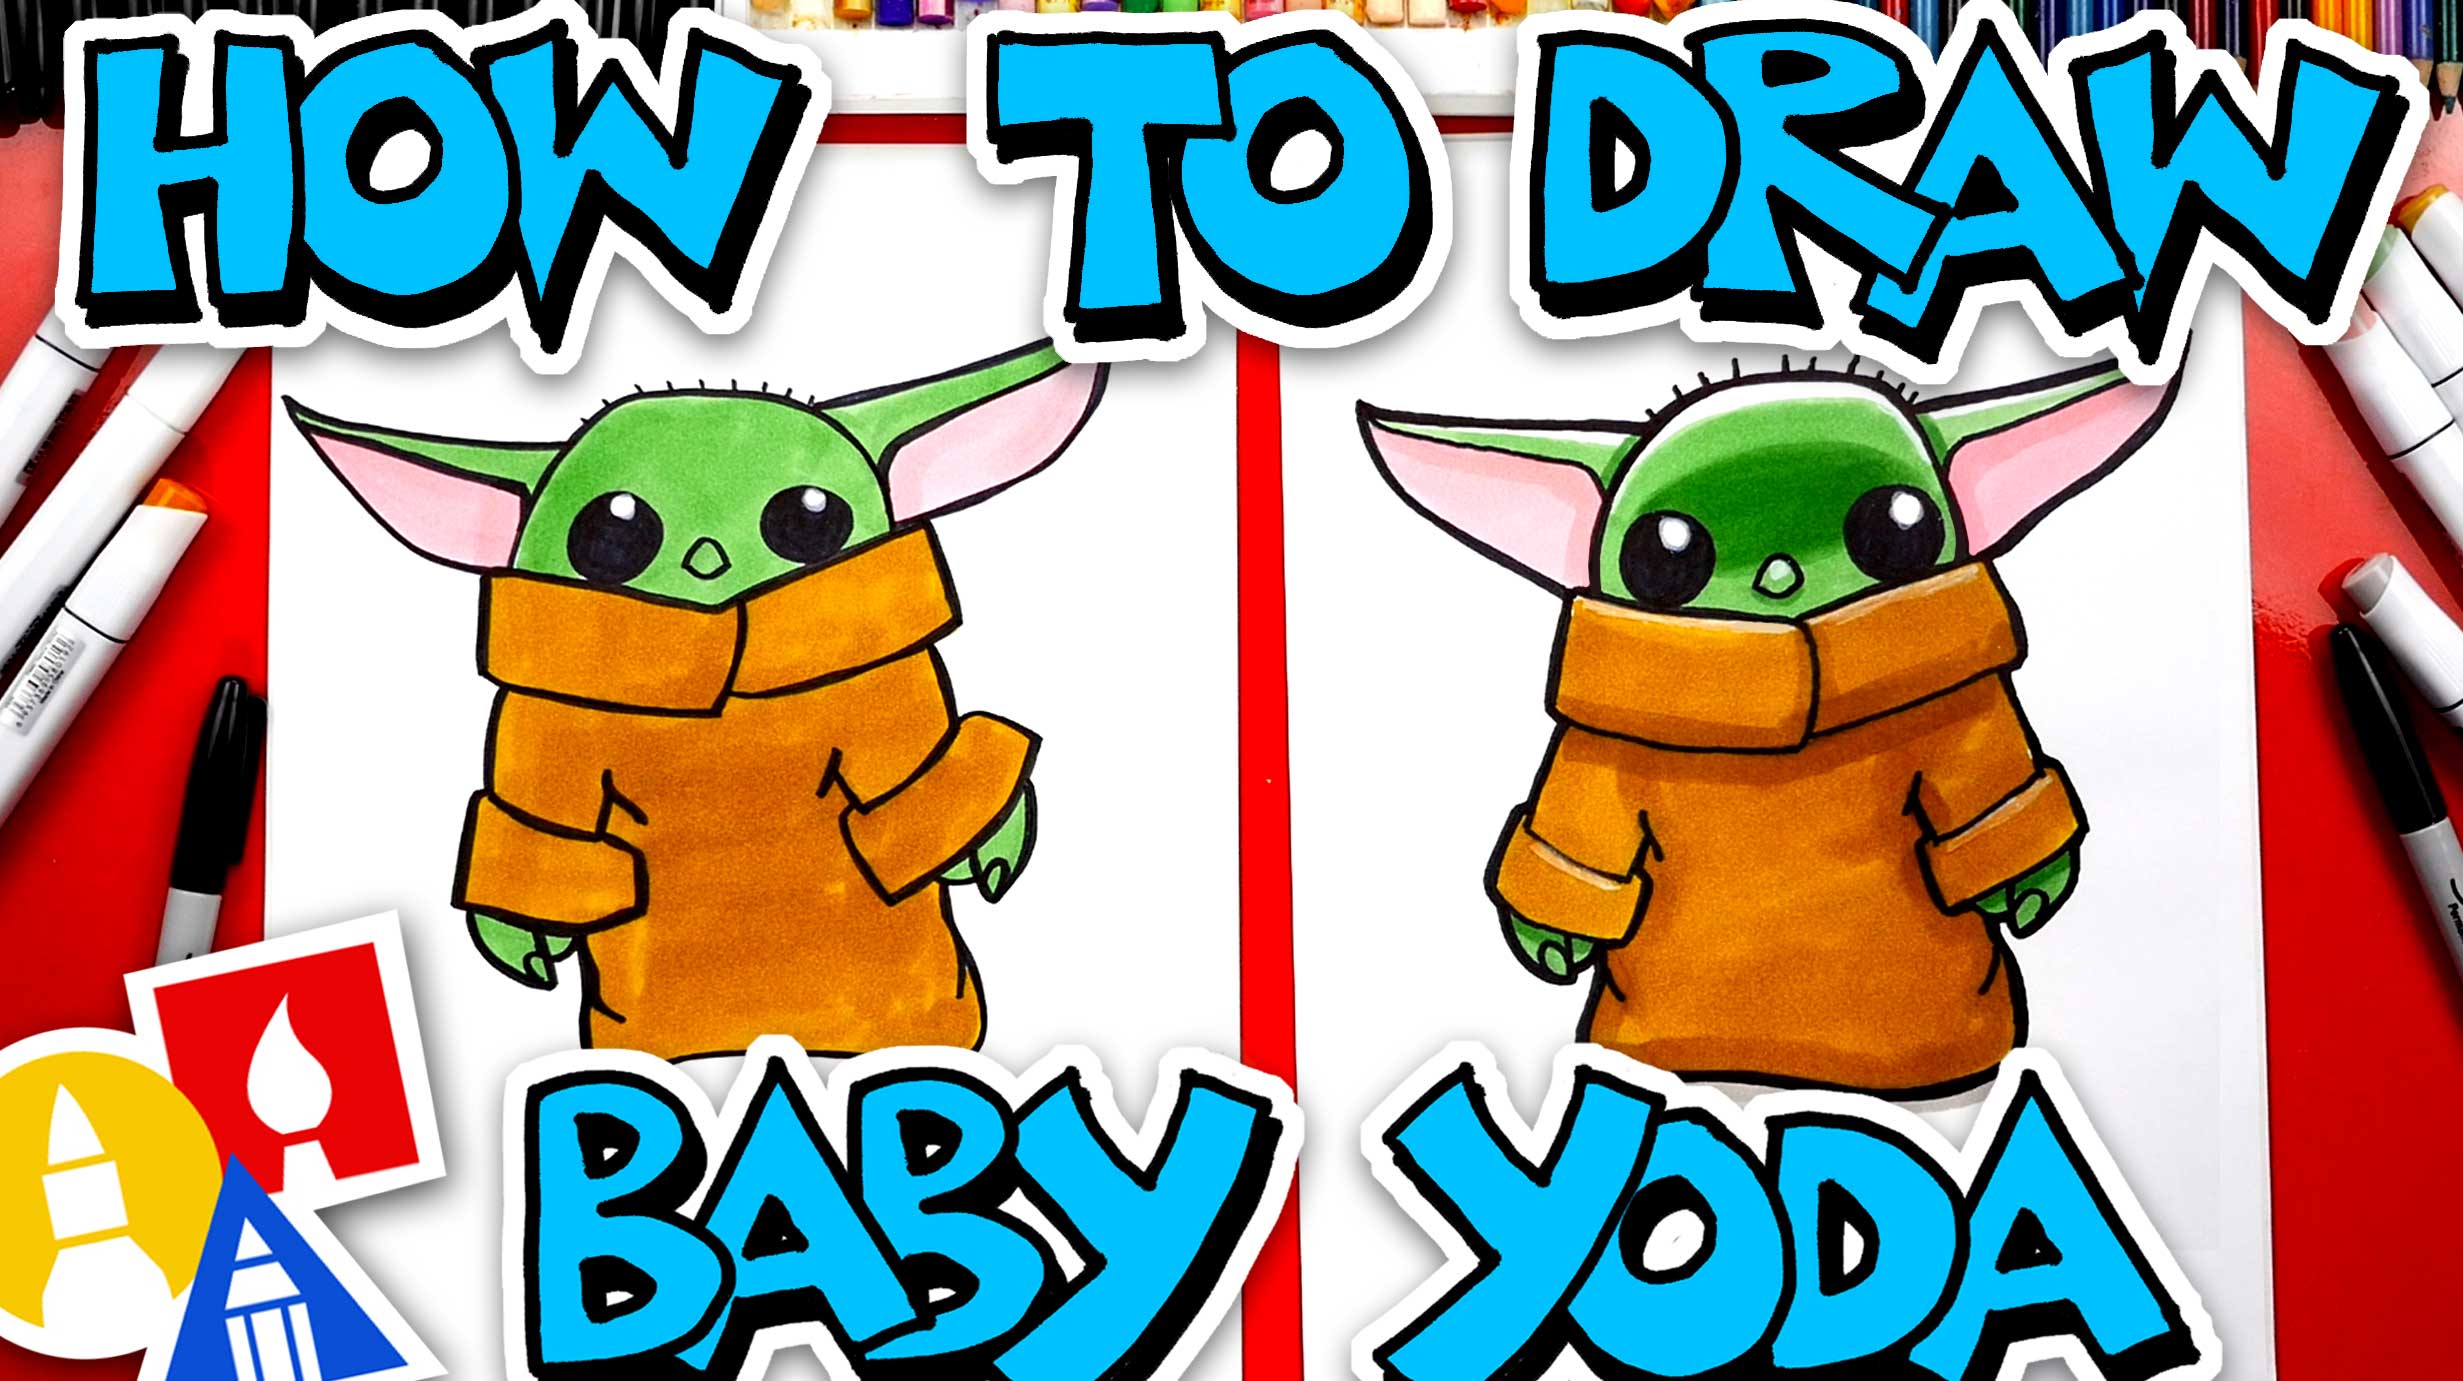 How to draw BABY YODA for painting/drawing/sketching step by step  quick/easy/simple - Barnett Gallery